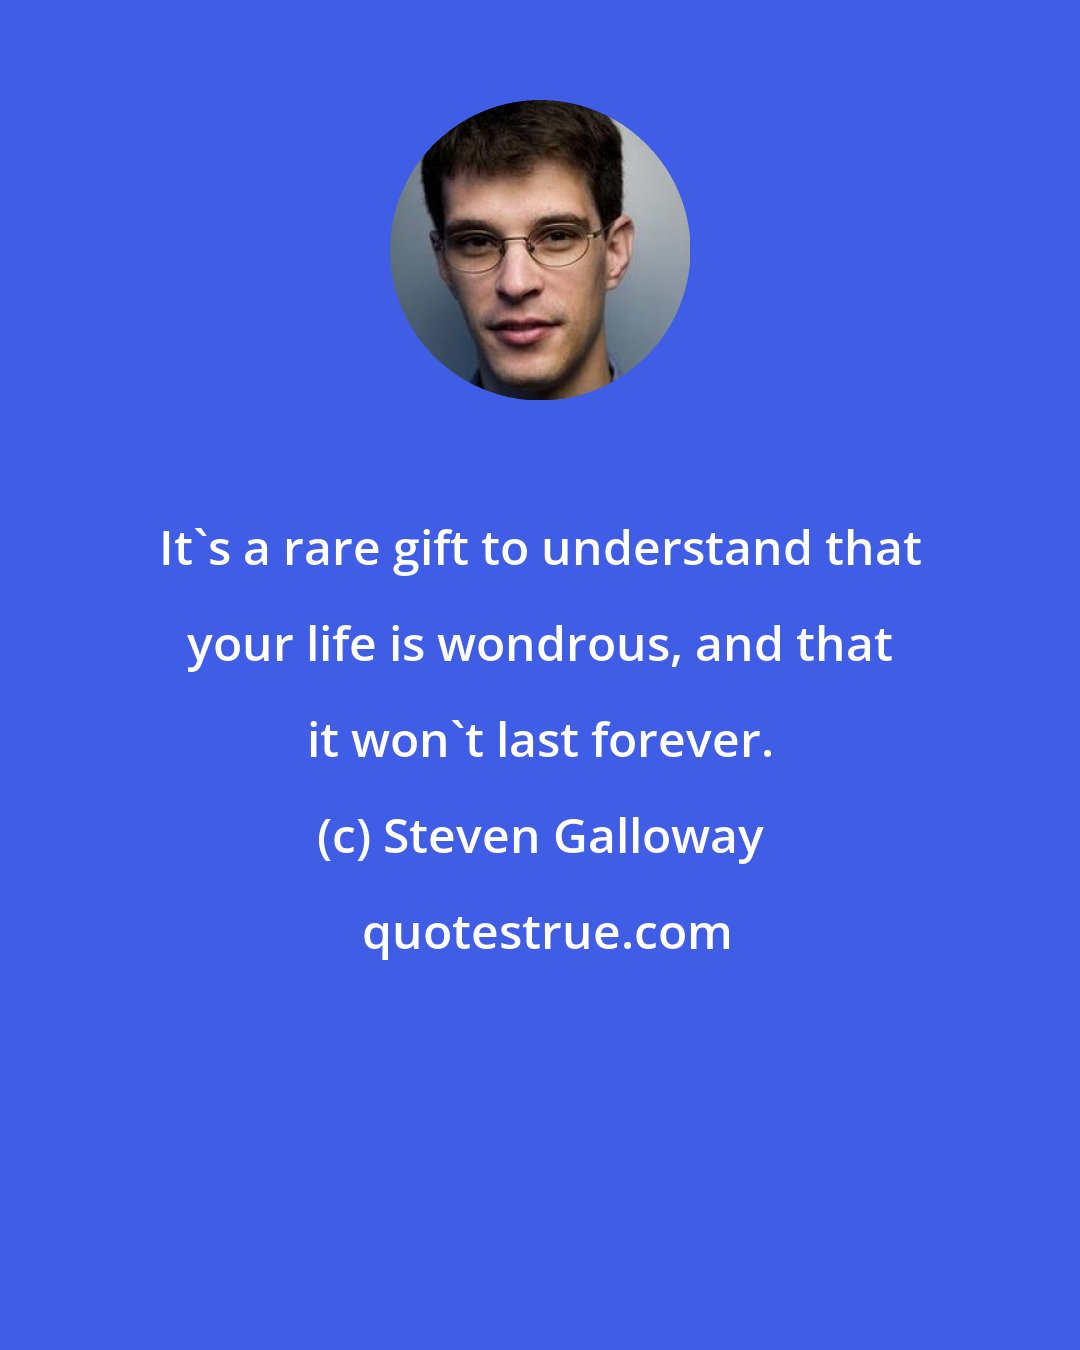 Steven Galloway: It's a rare gift to understand that your life is wondrous, and that it won't last forever.